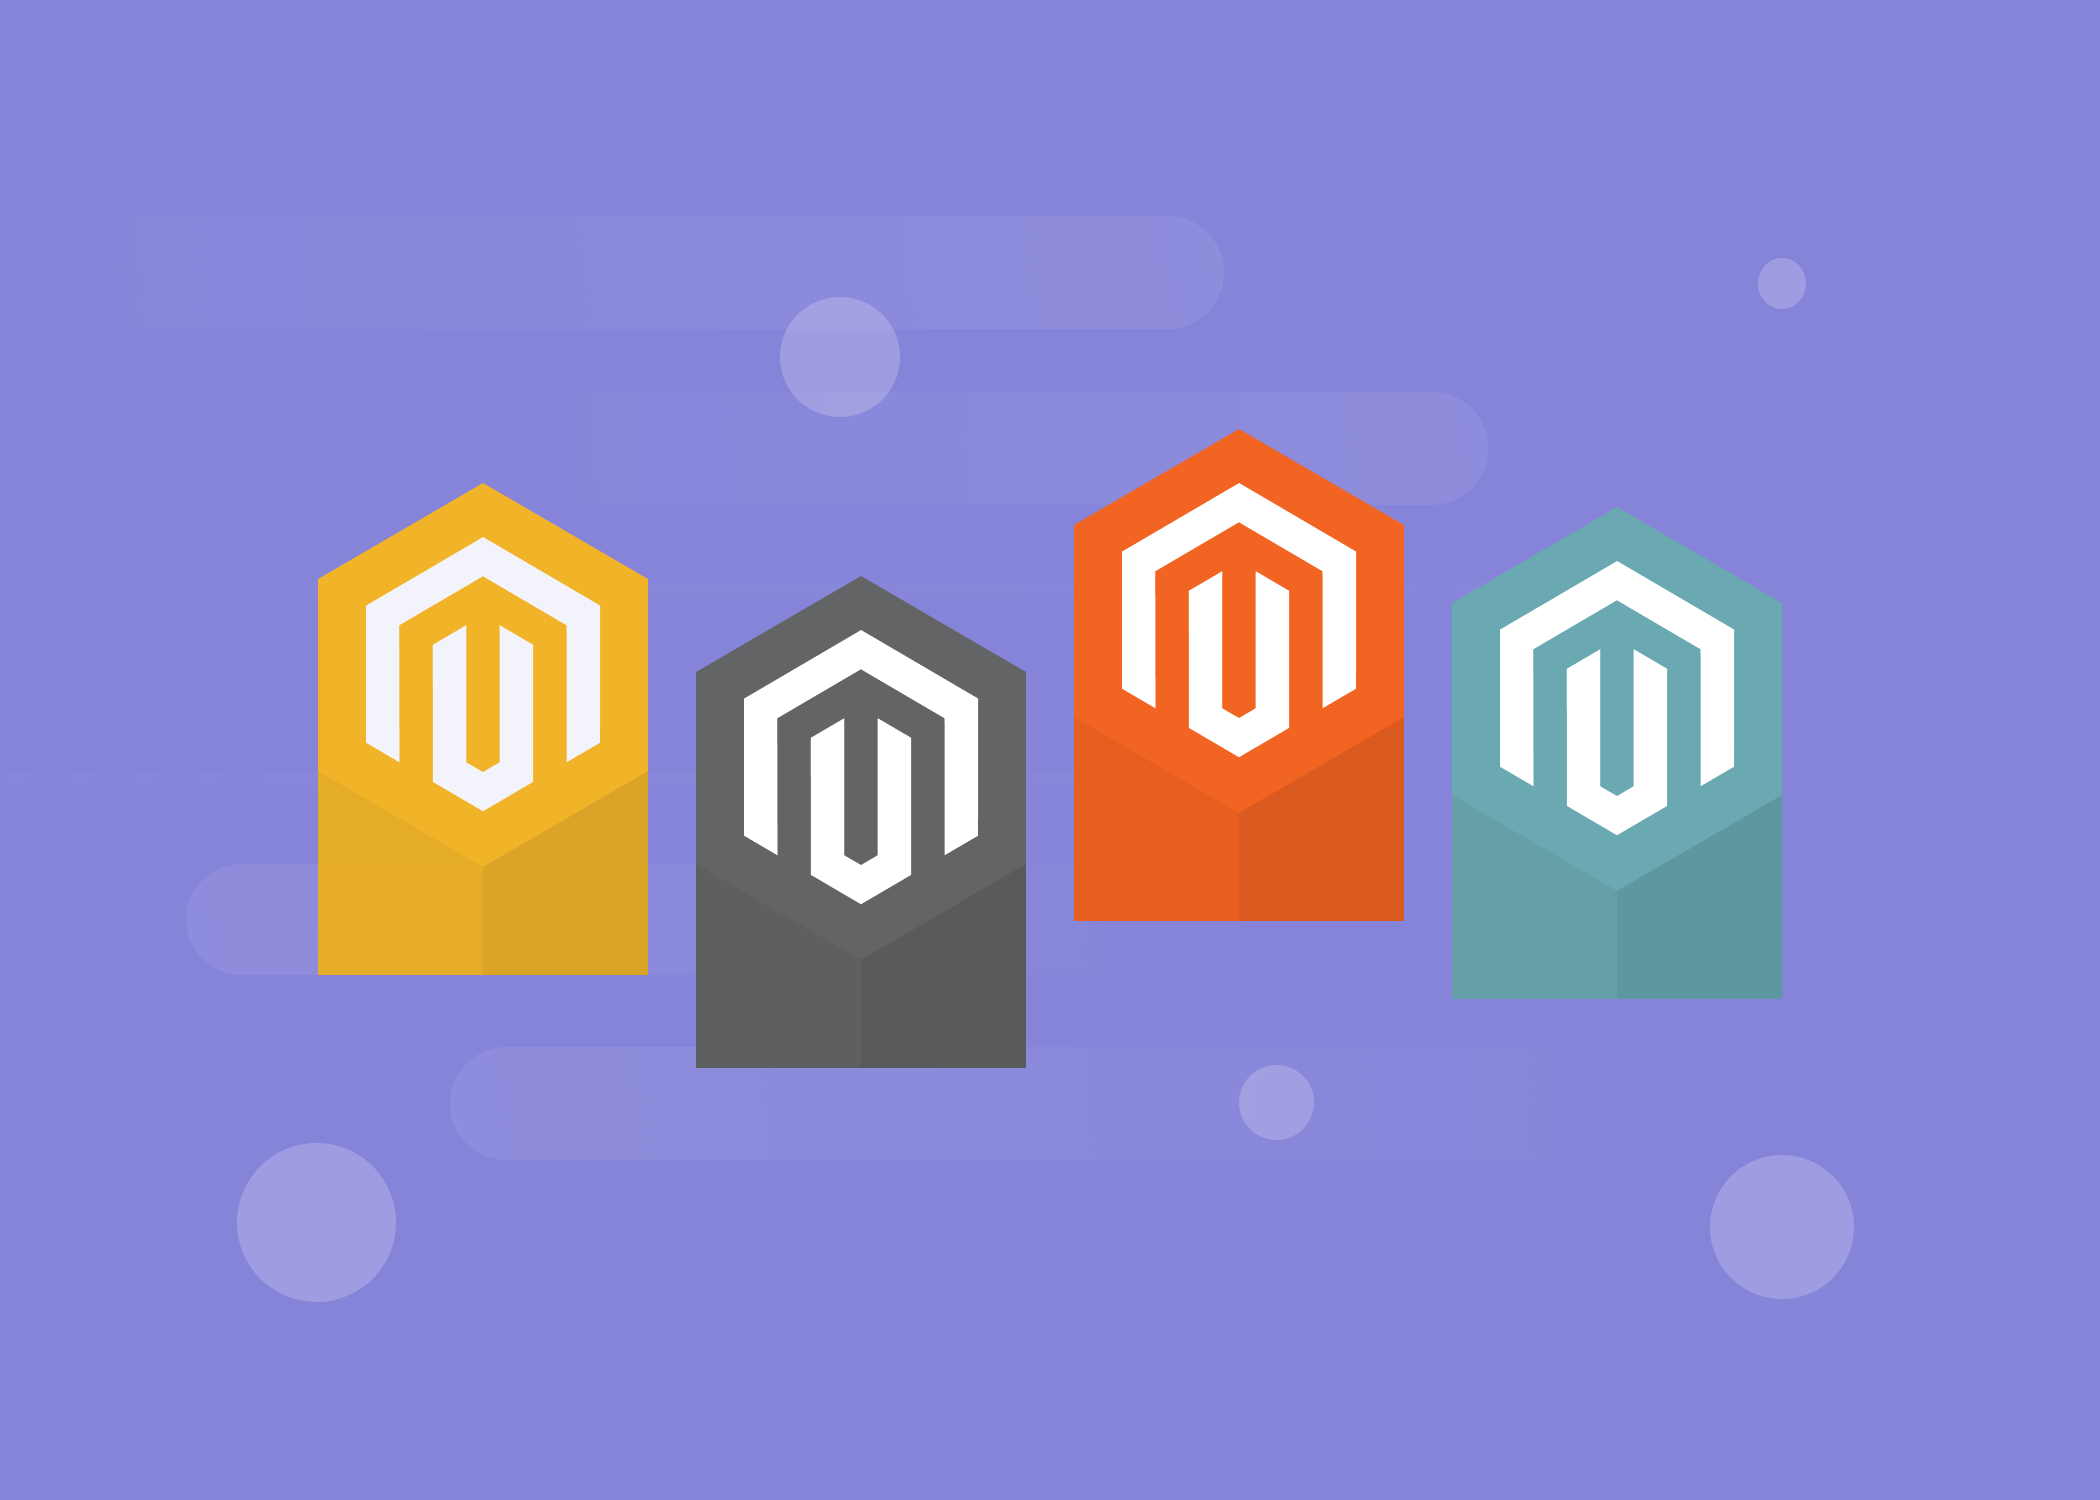 Magento Certifications: How to Become a Magento Certified Developer in 2023